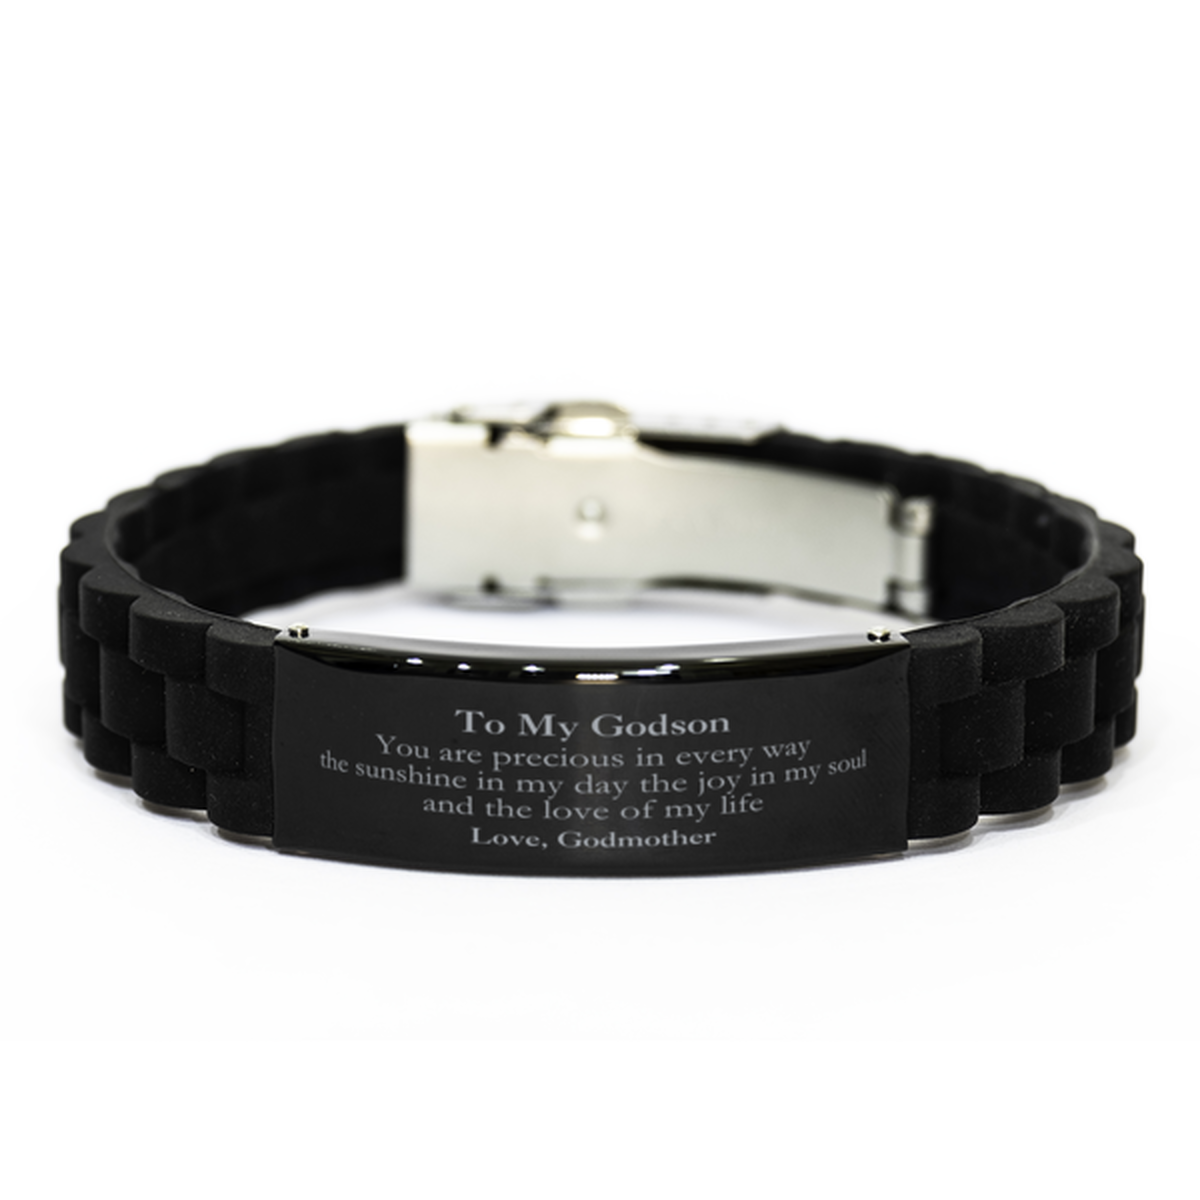 Graduation Gifts for Godson Black Glidelock Clasp Bracelet Present from Godmother, Christmas Godson Birthday Gifts Godson You are precious in every way the sunshine in my day. Love, Godmother